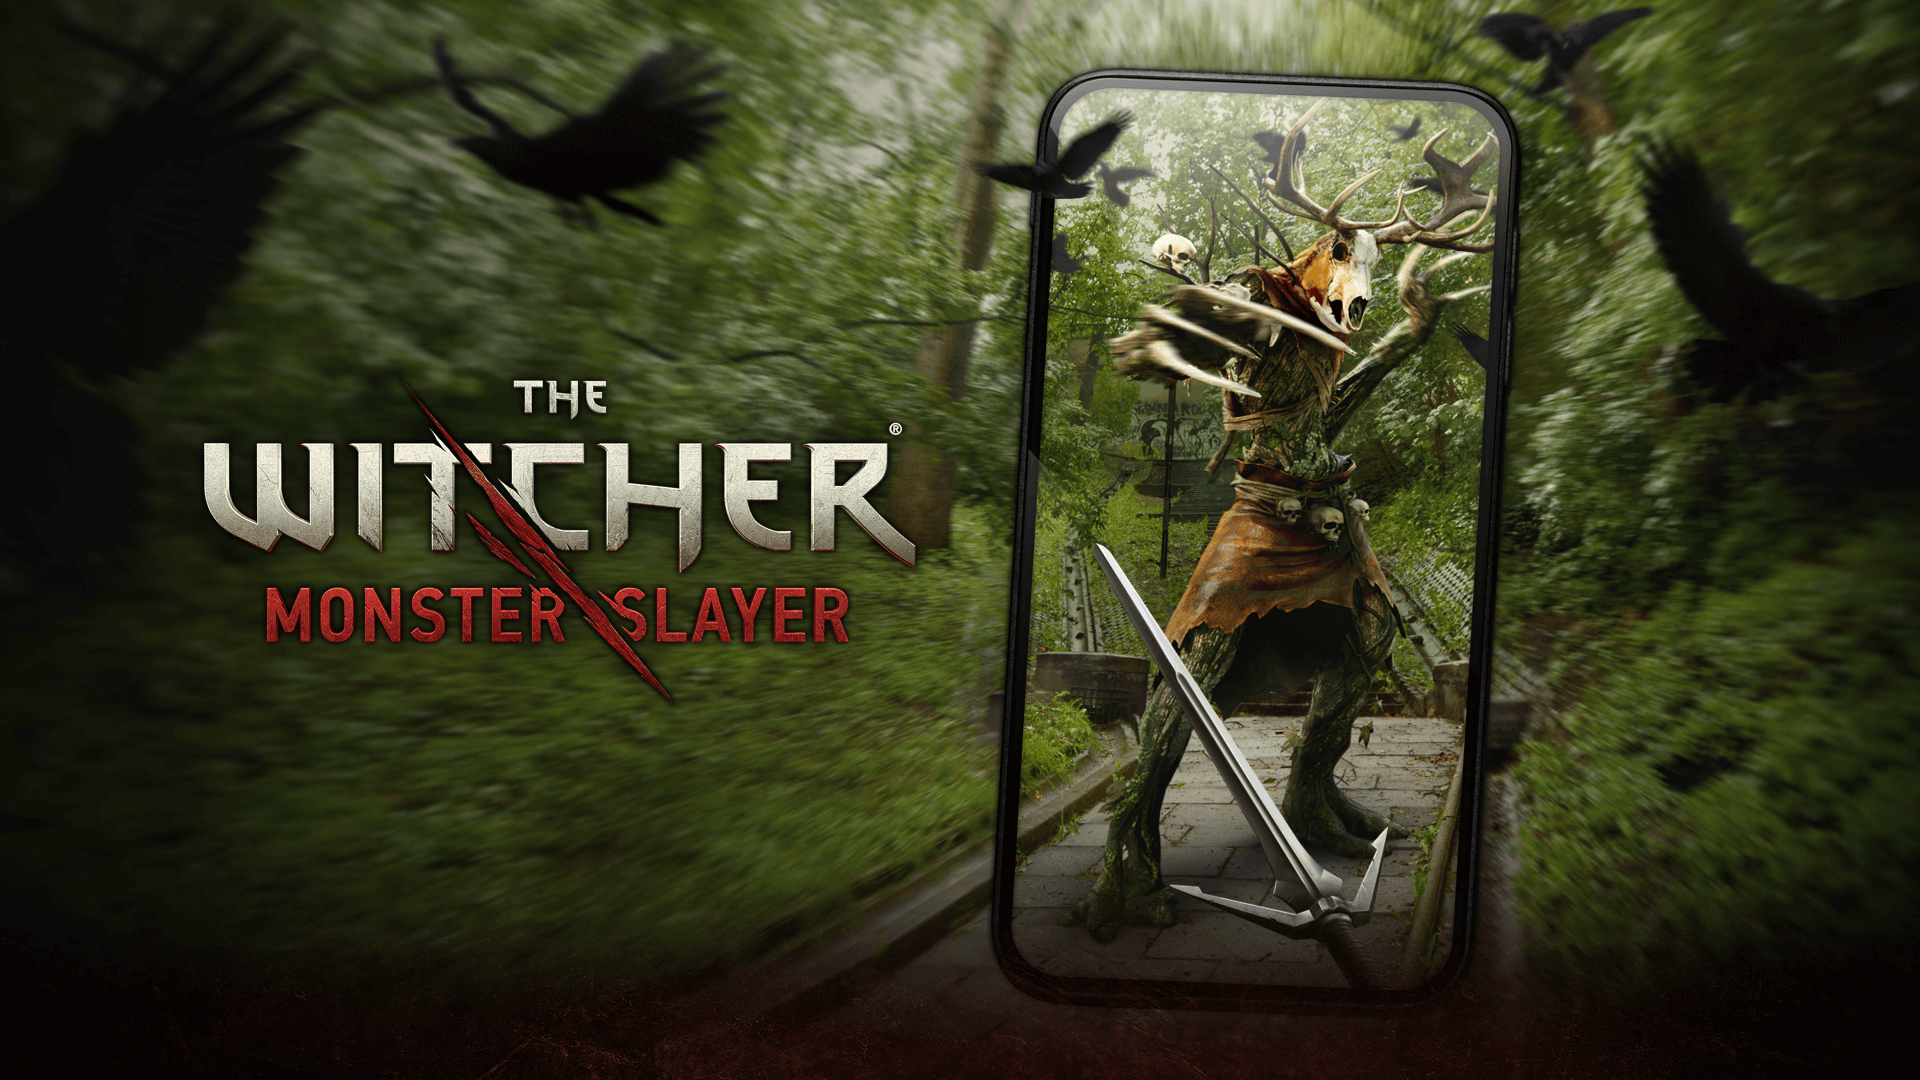 The witcher: monster slayer cover